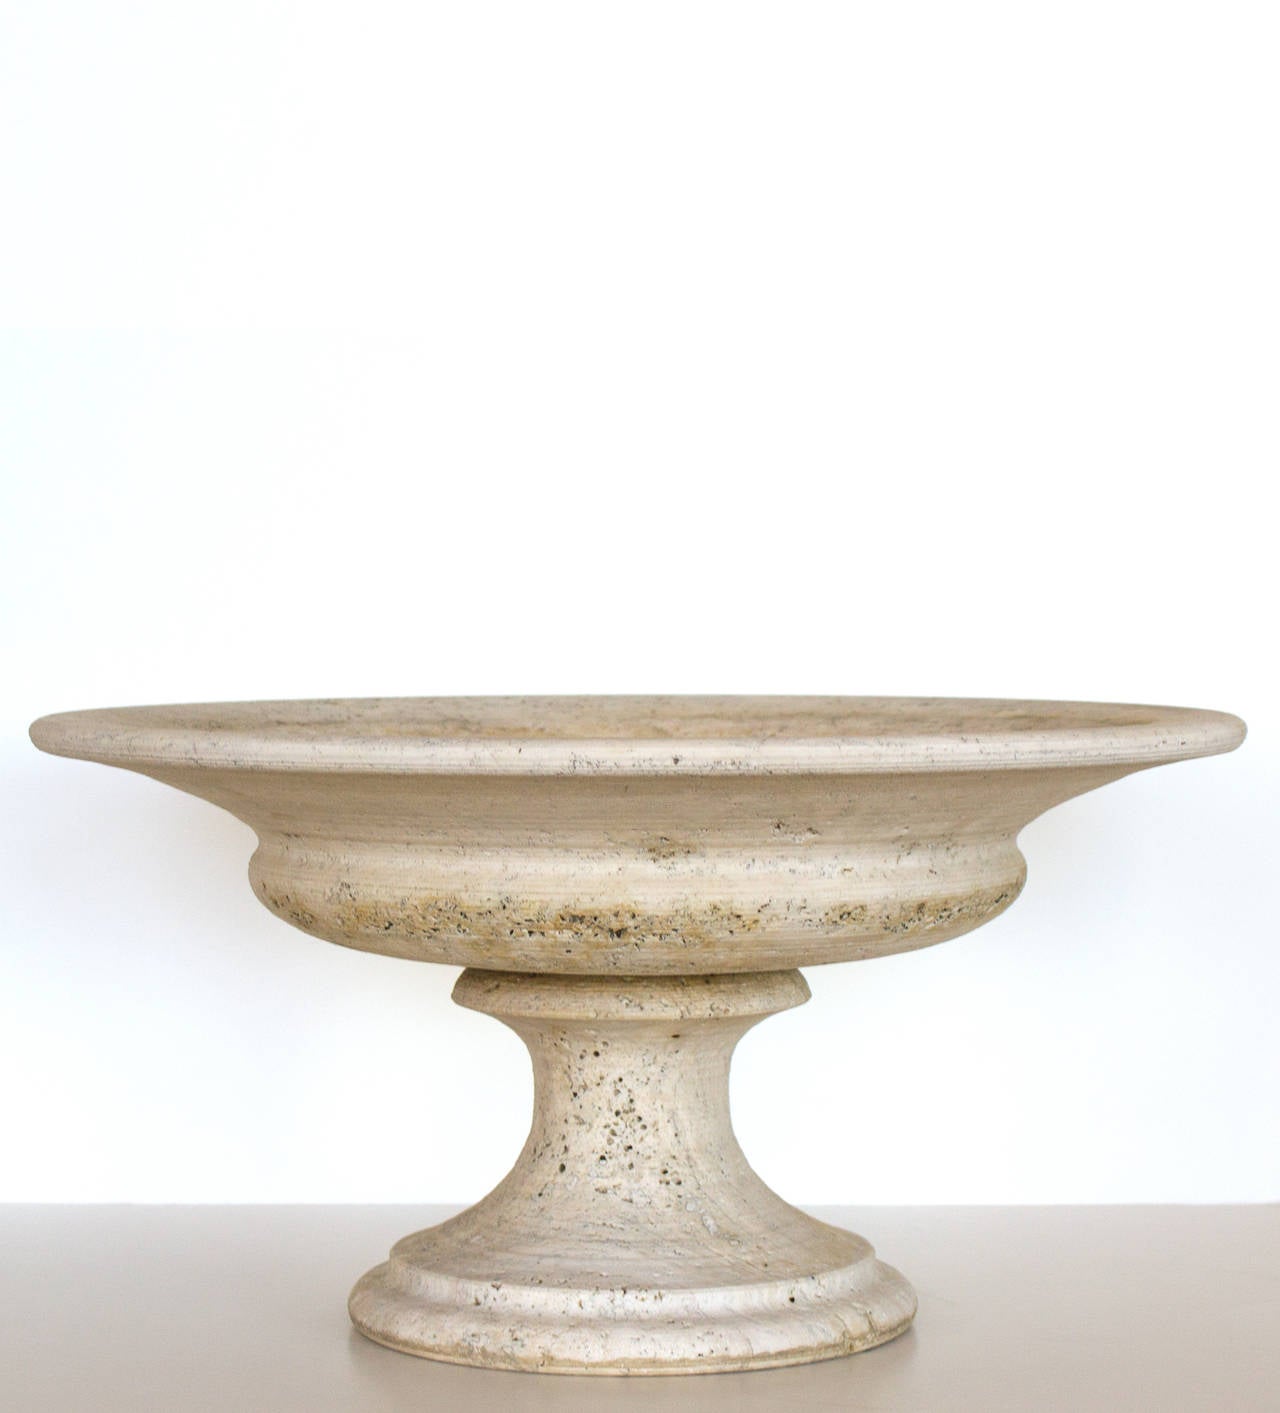 A classical garden urn made from cast stone.